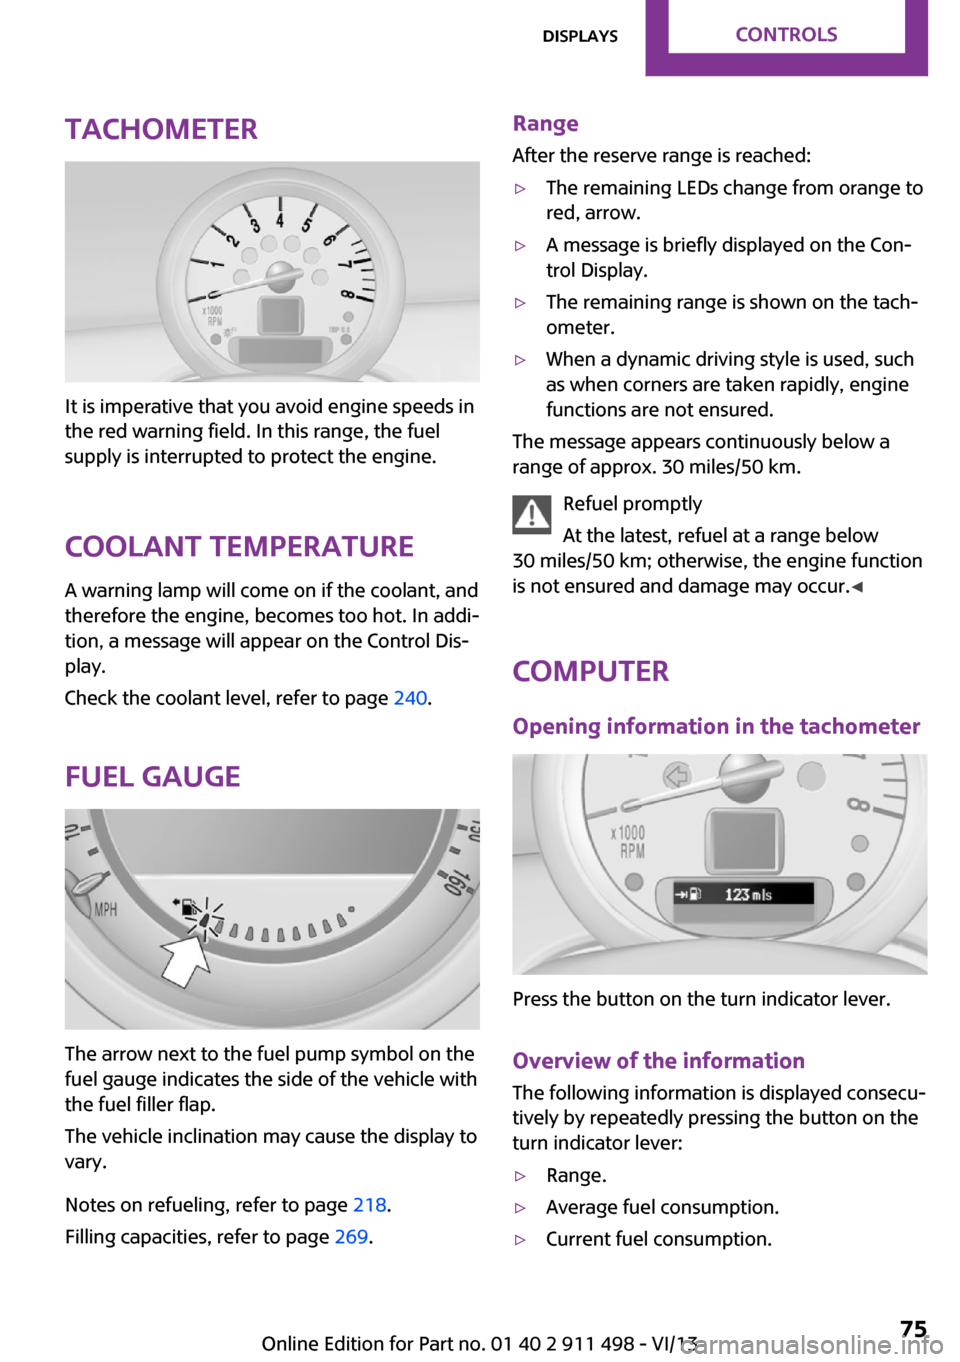 MINI Roadster 2014  Owners Manual (Mini Connected) Tachometer
It is imperative that you avoid engine speeds in
the red warning field. In this range, the fuel
supply is interrupted to protect the engine.
Coolant temperature A warning lamp will come on 